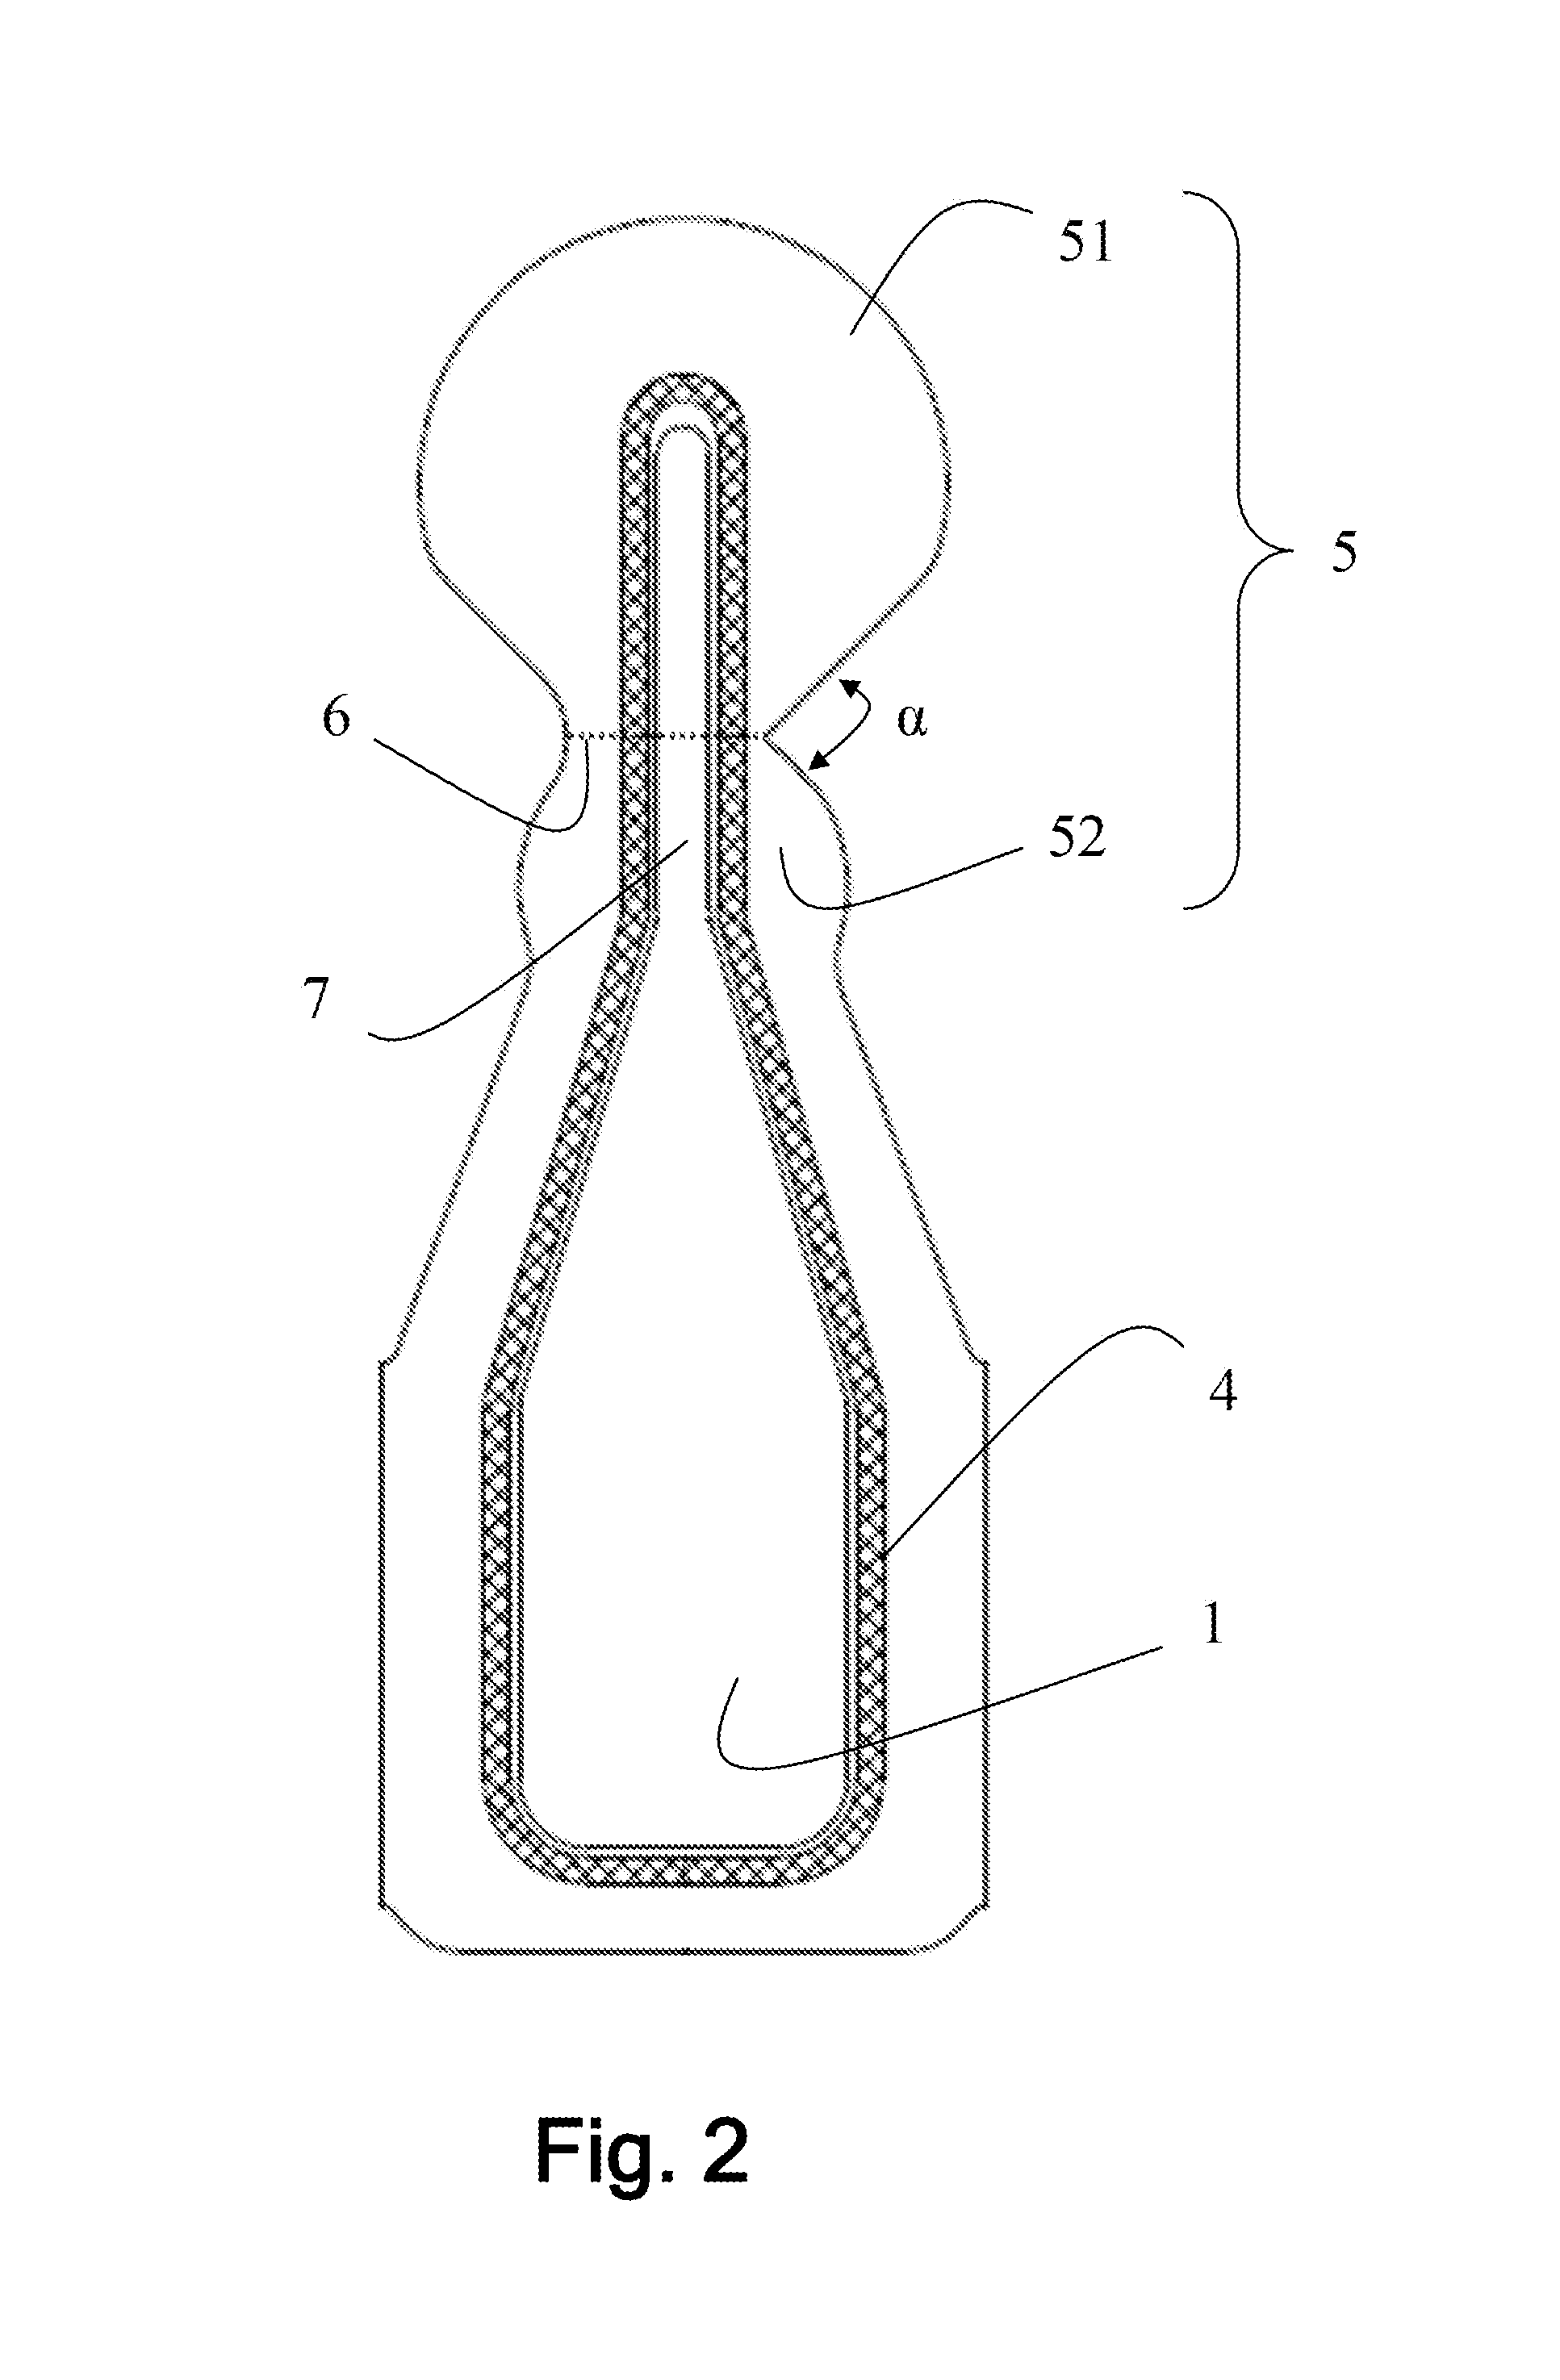 Non-resealable thermoformed packaging for liquid or pasty substances